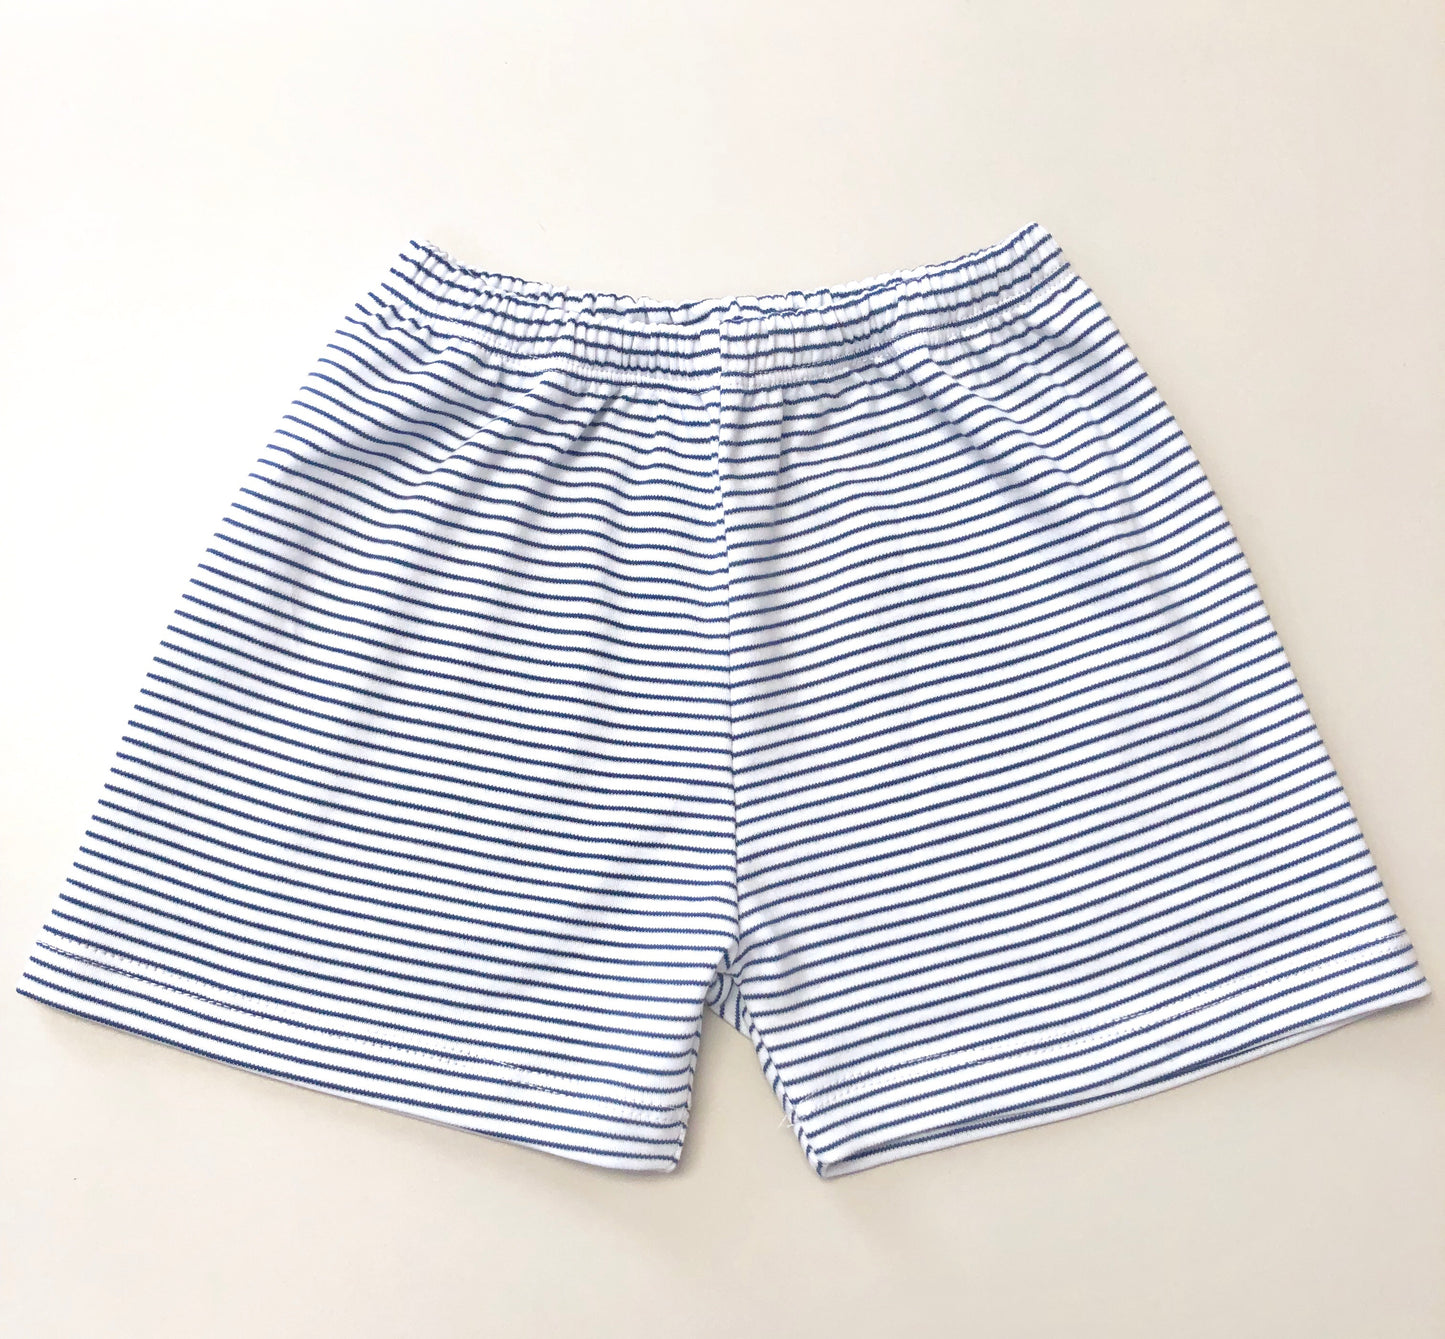 Pima plain shorts/ see pictures for all options